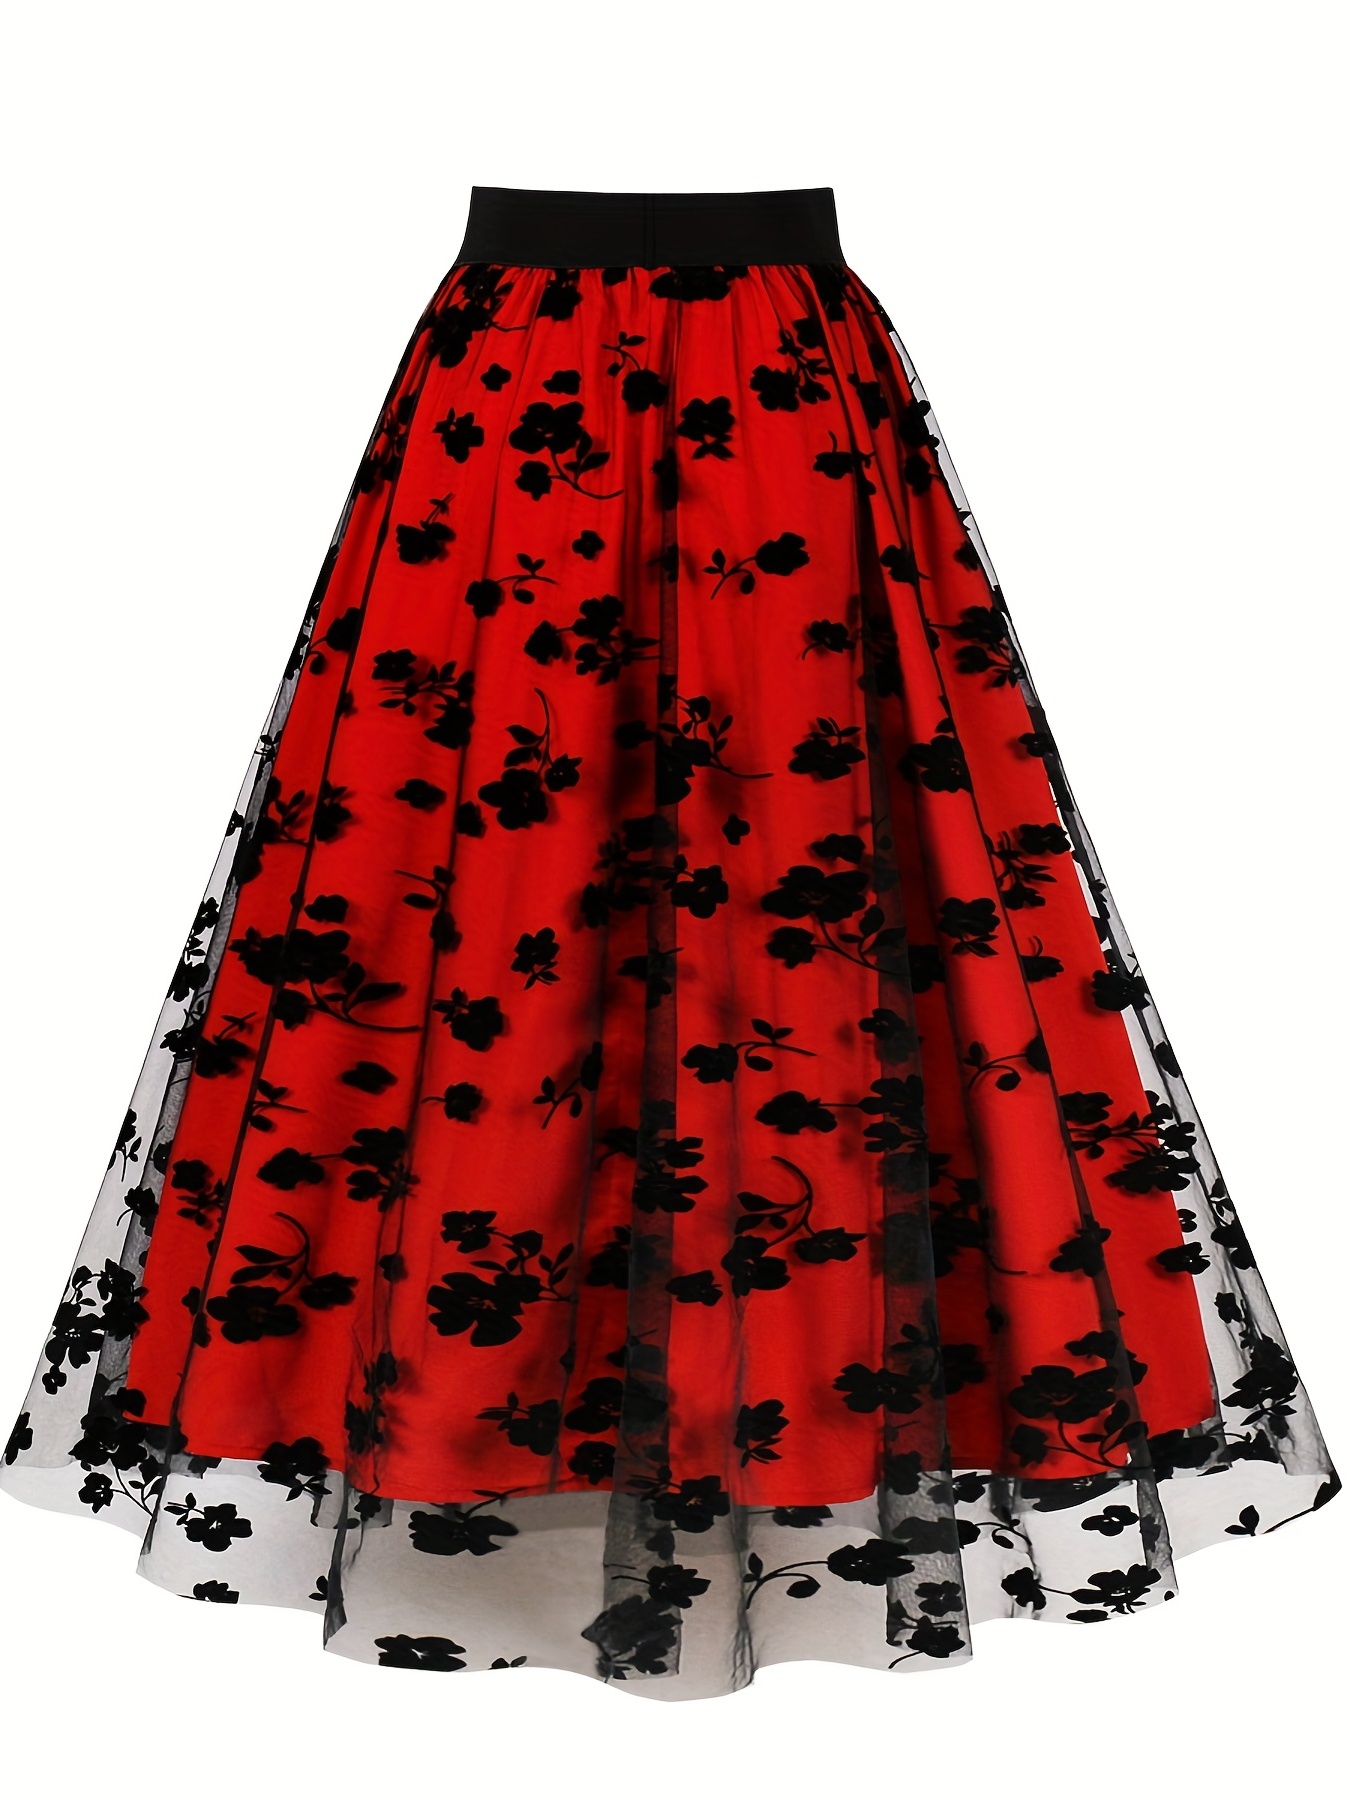 Black & Red Dress with Velvet Top, Red Sash and Black Floral Overlay Skirt,  Size S